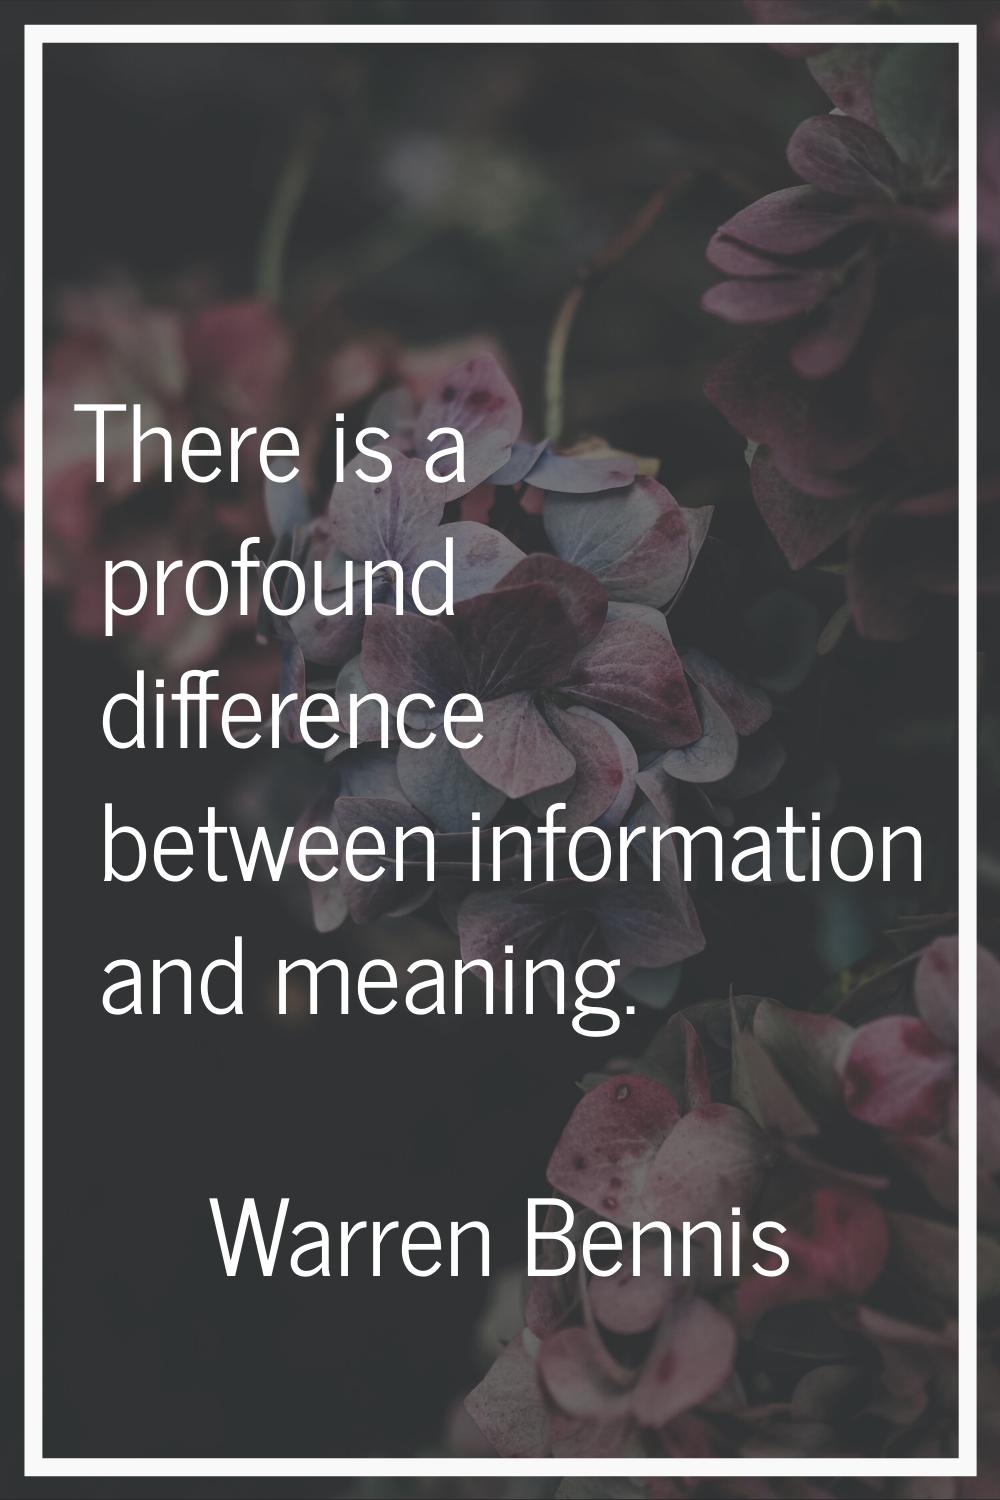 There is a profound difference between information and meaning.